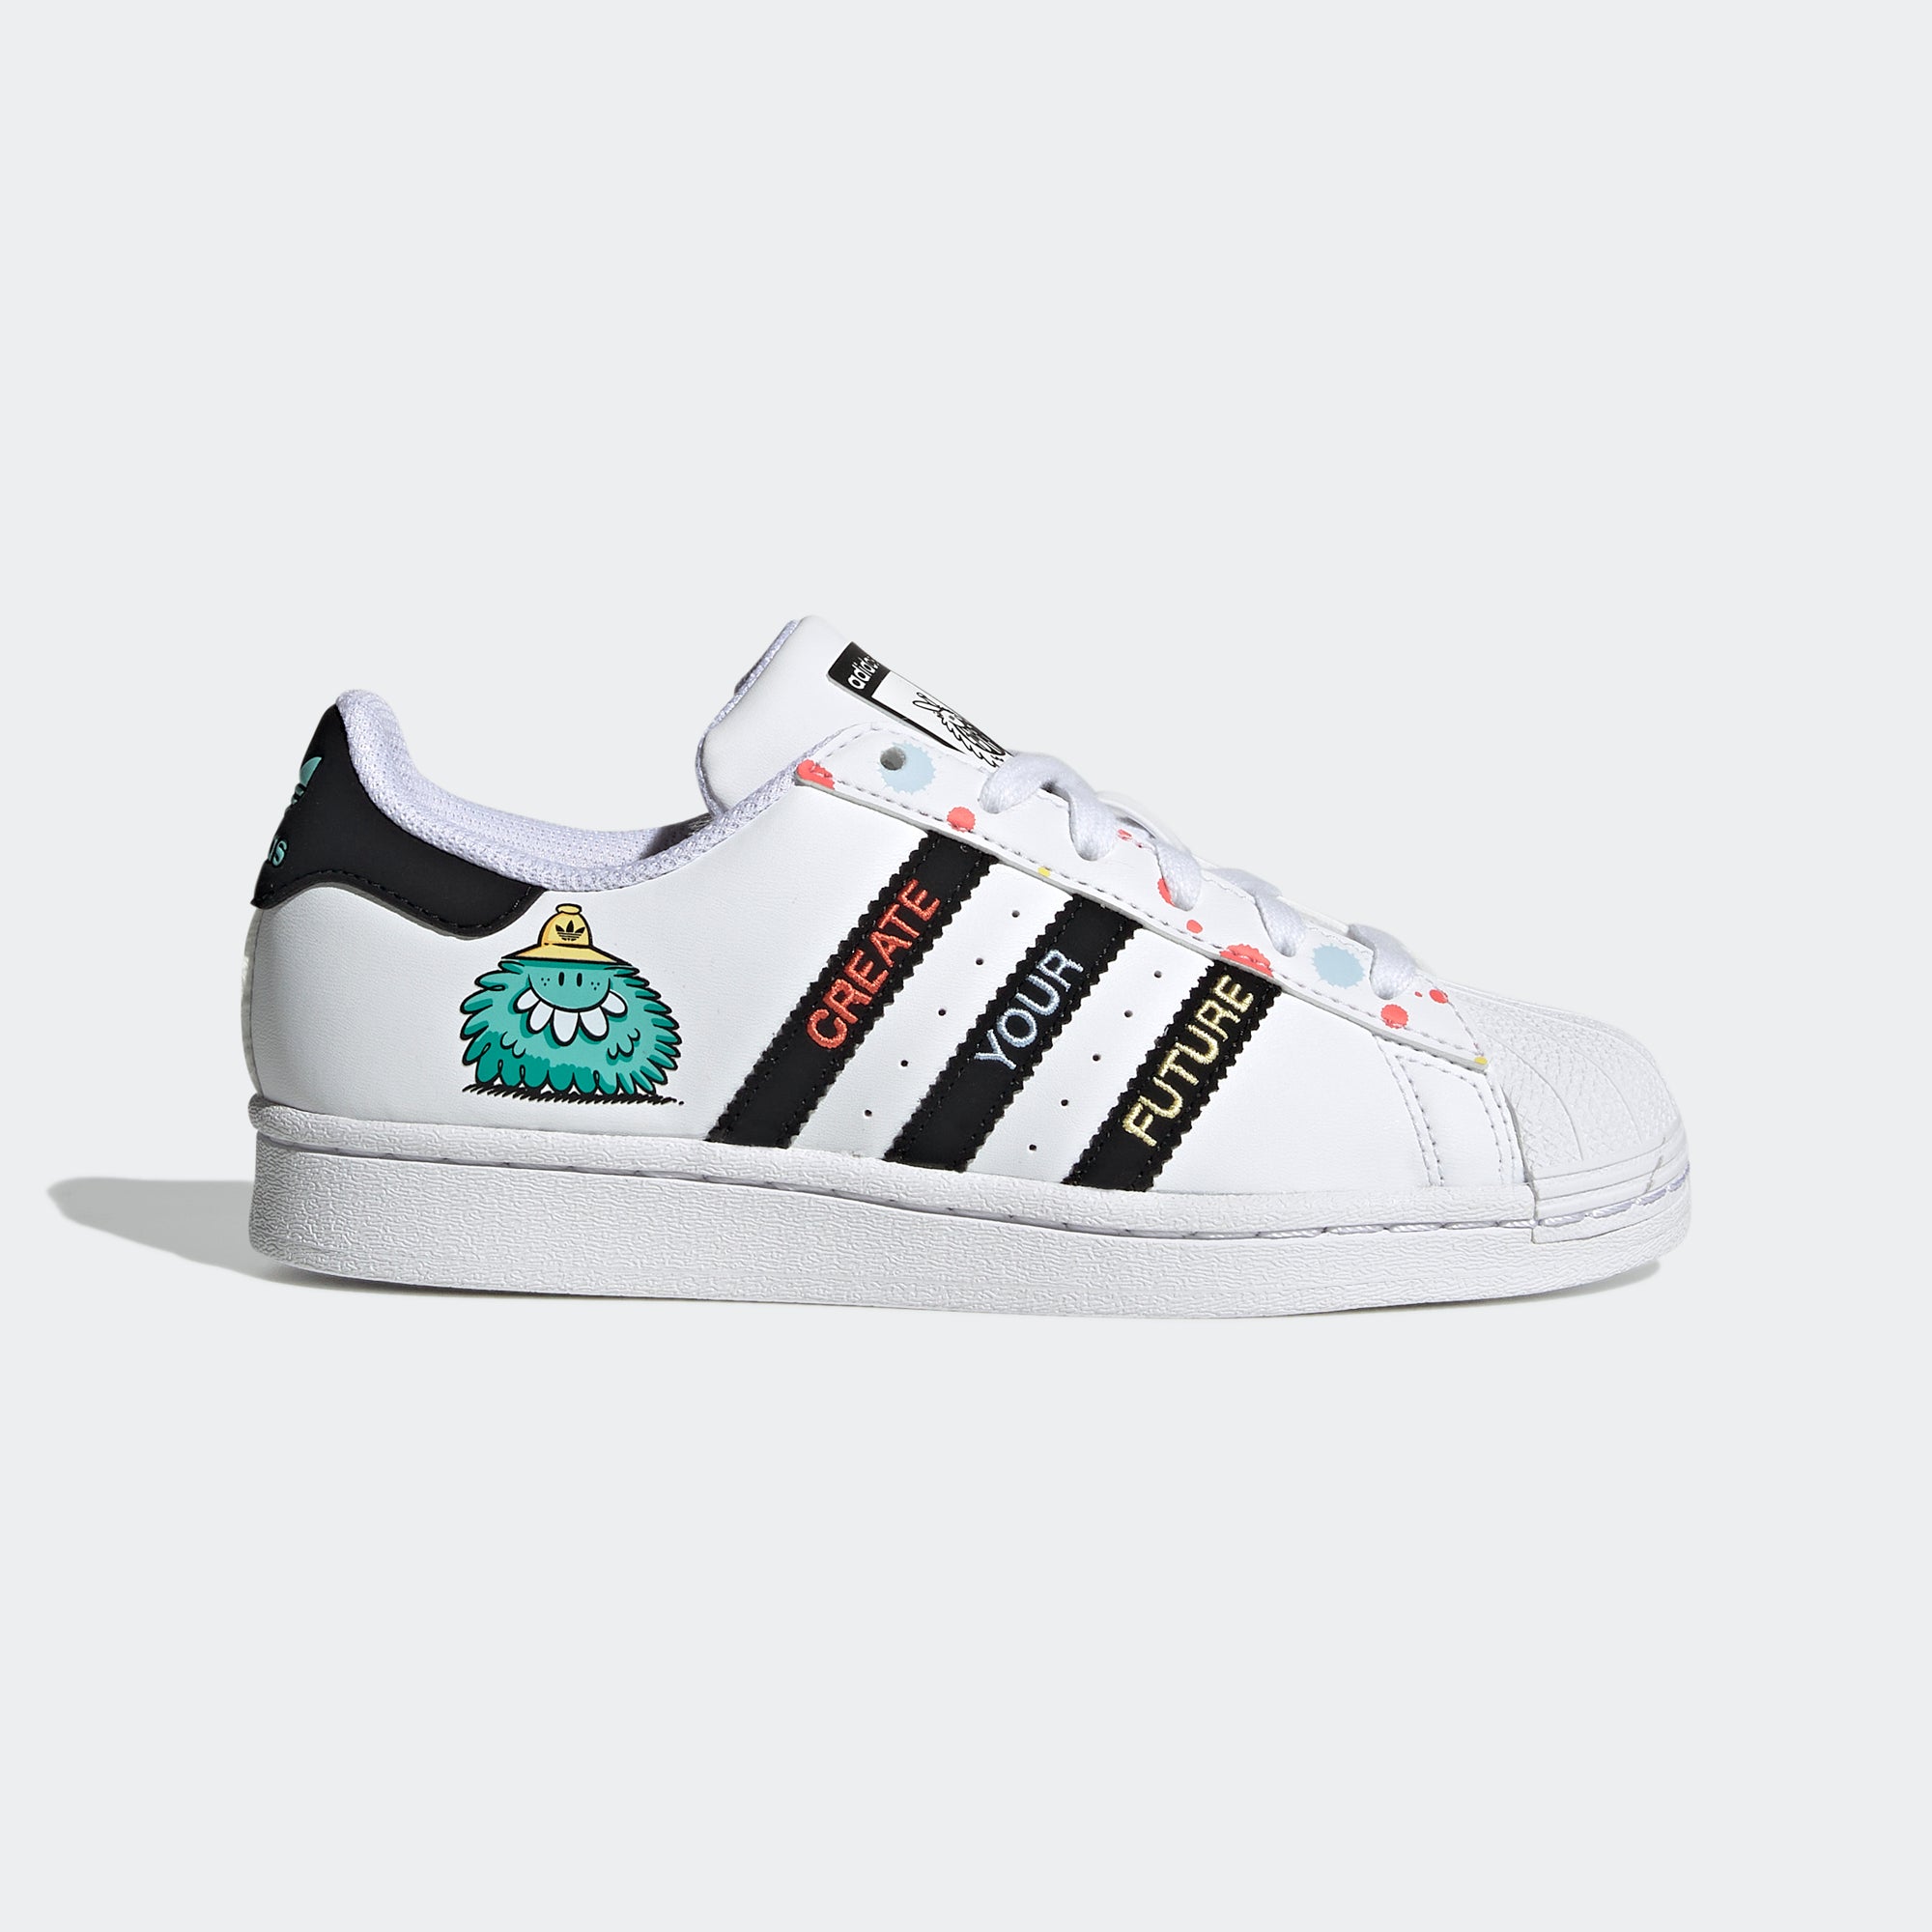 adidas x kevin lyons superstar 360 shoes